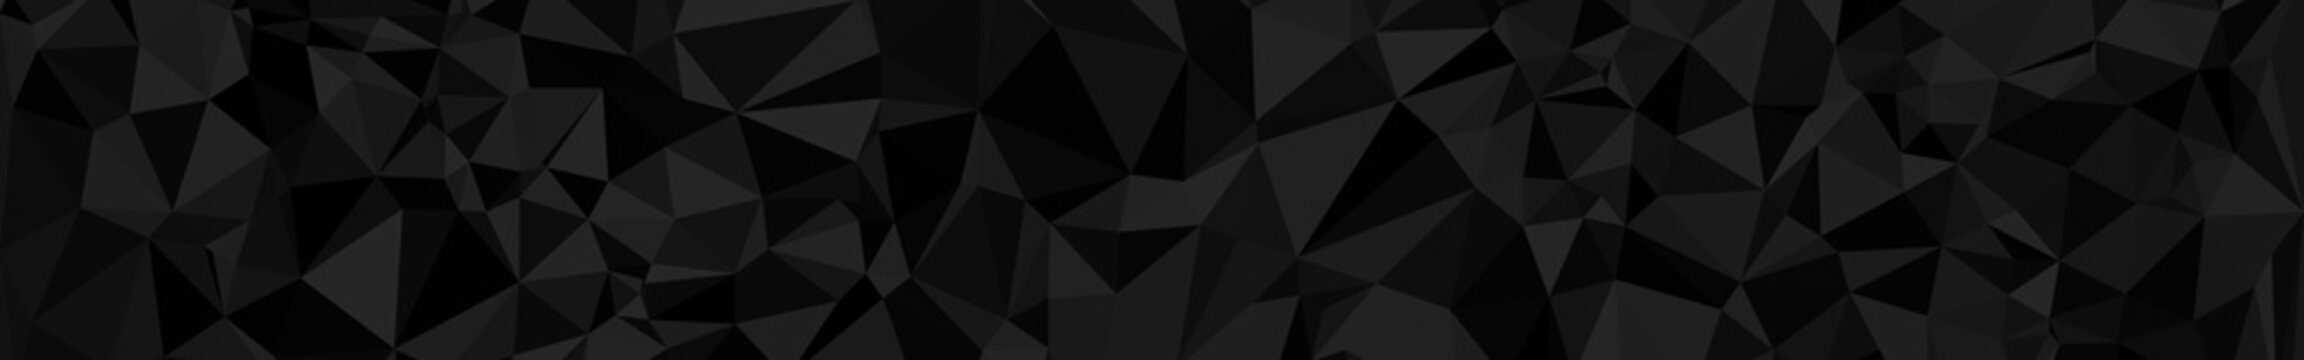 Abstract horizontal banner or background of triangles in black colors.